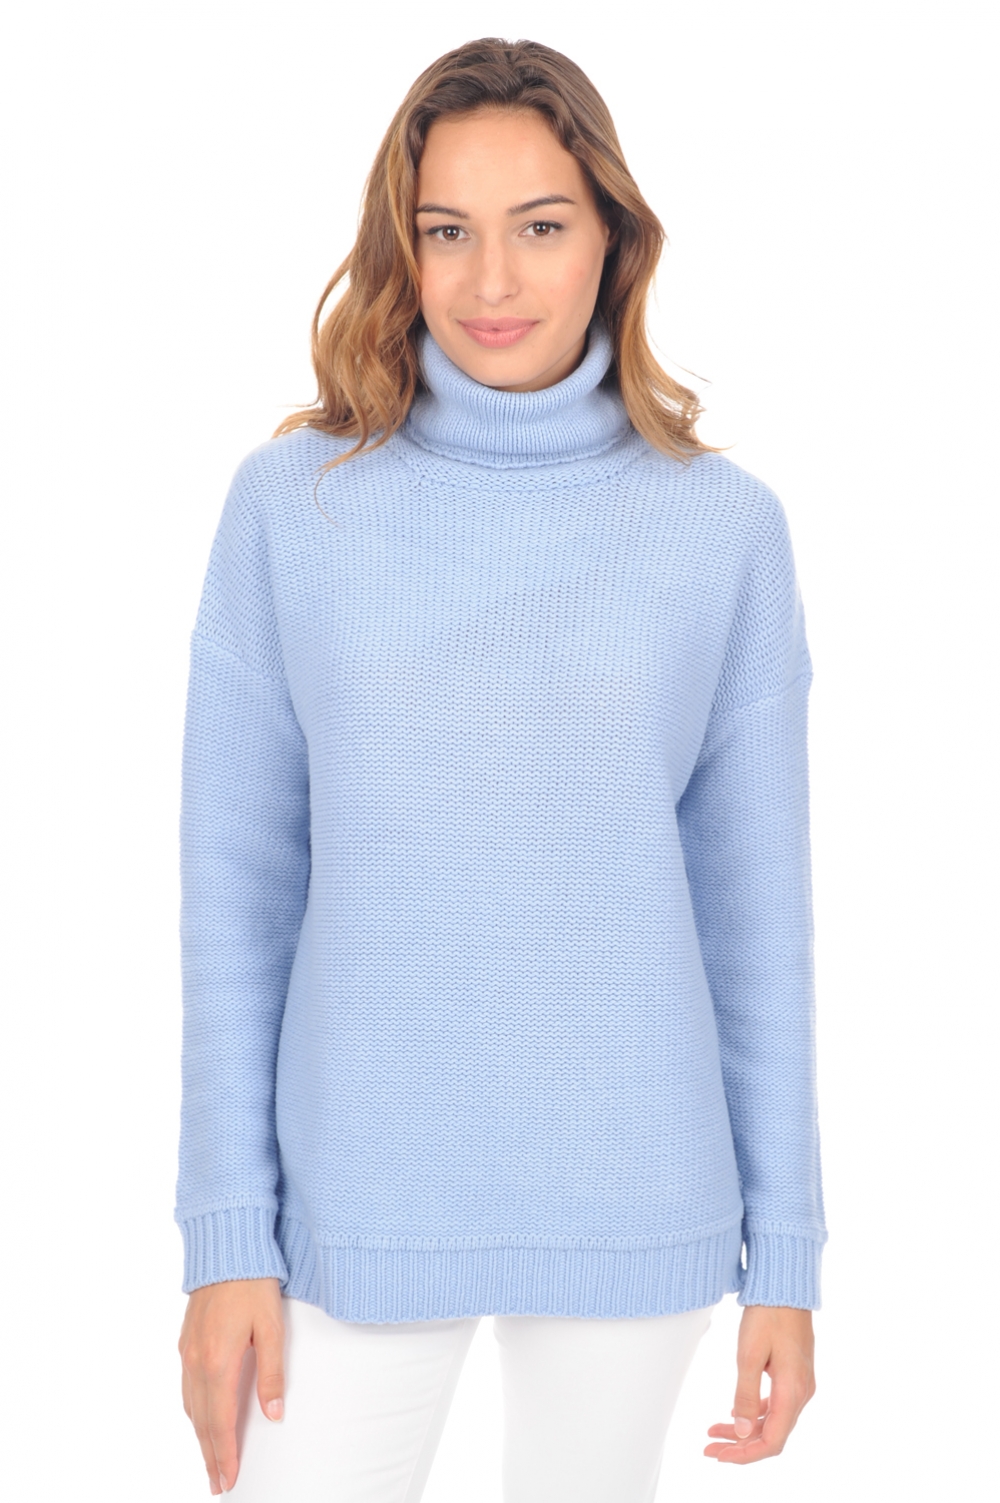 Yak ladies roll neck ygritte sky blue s3